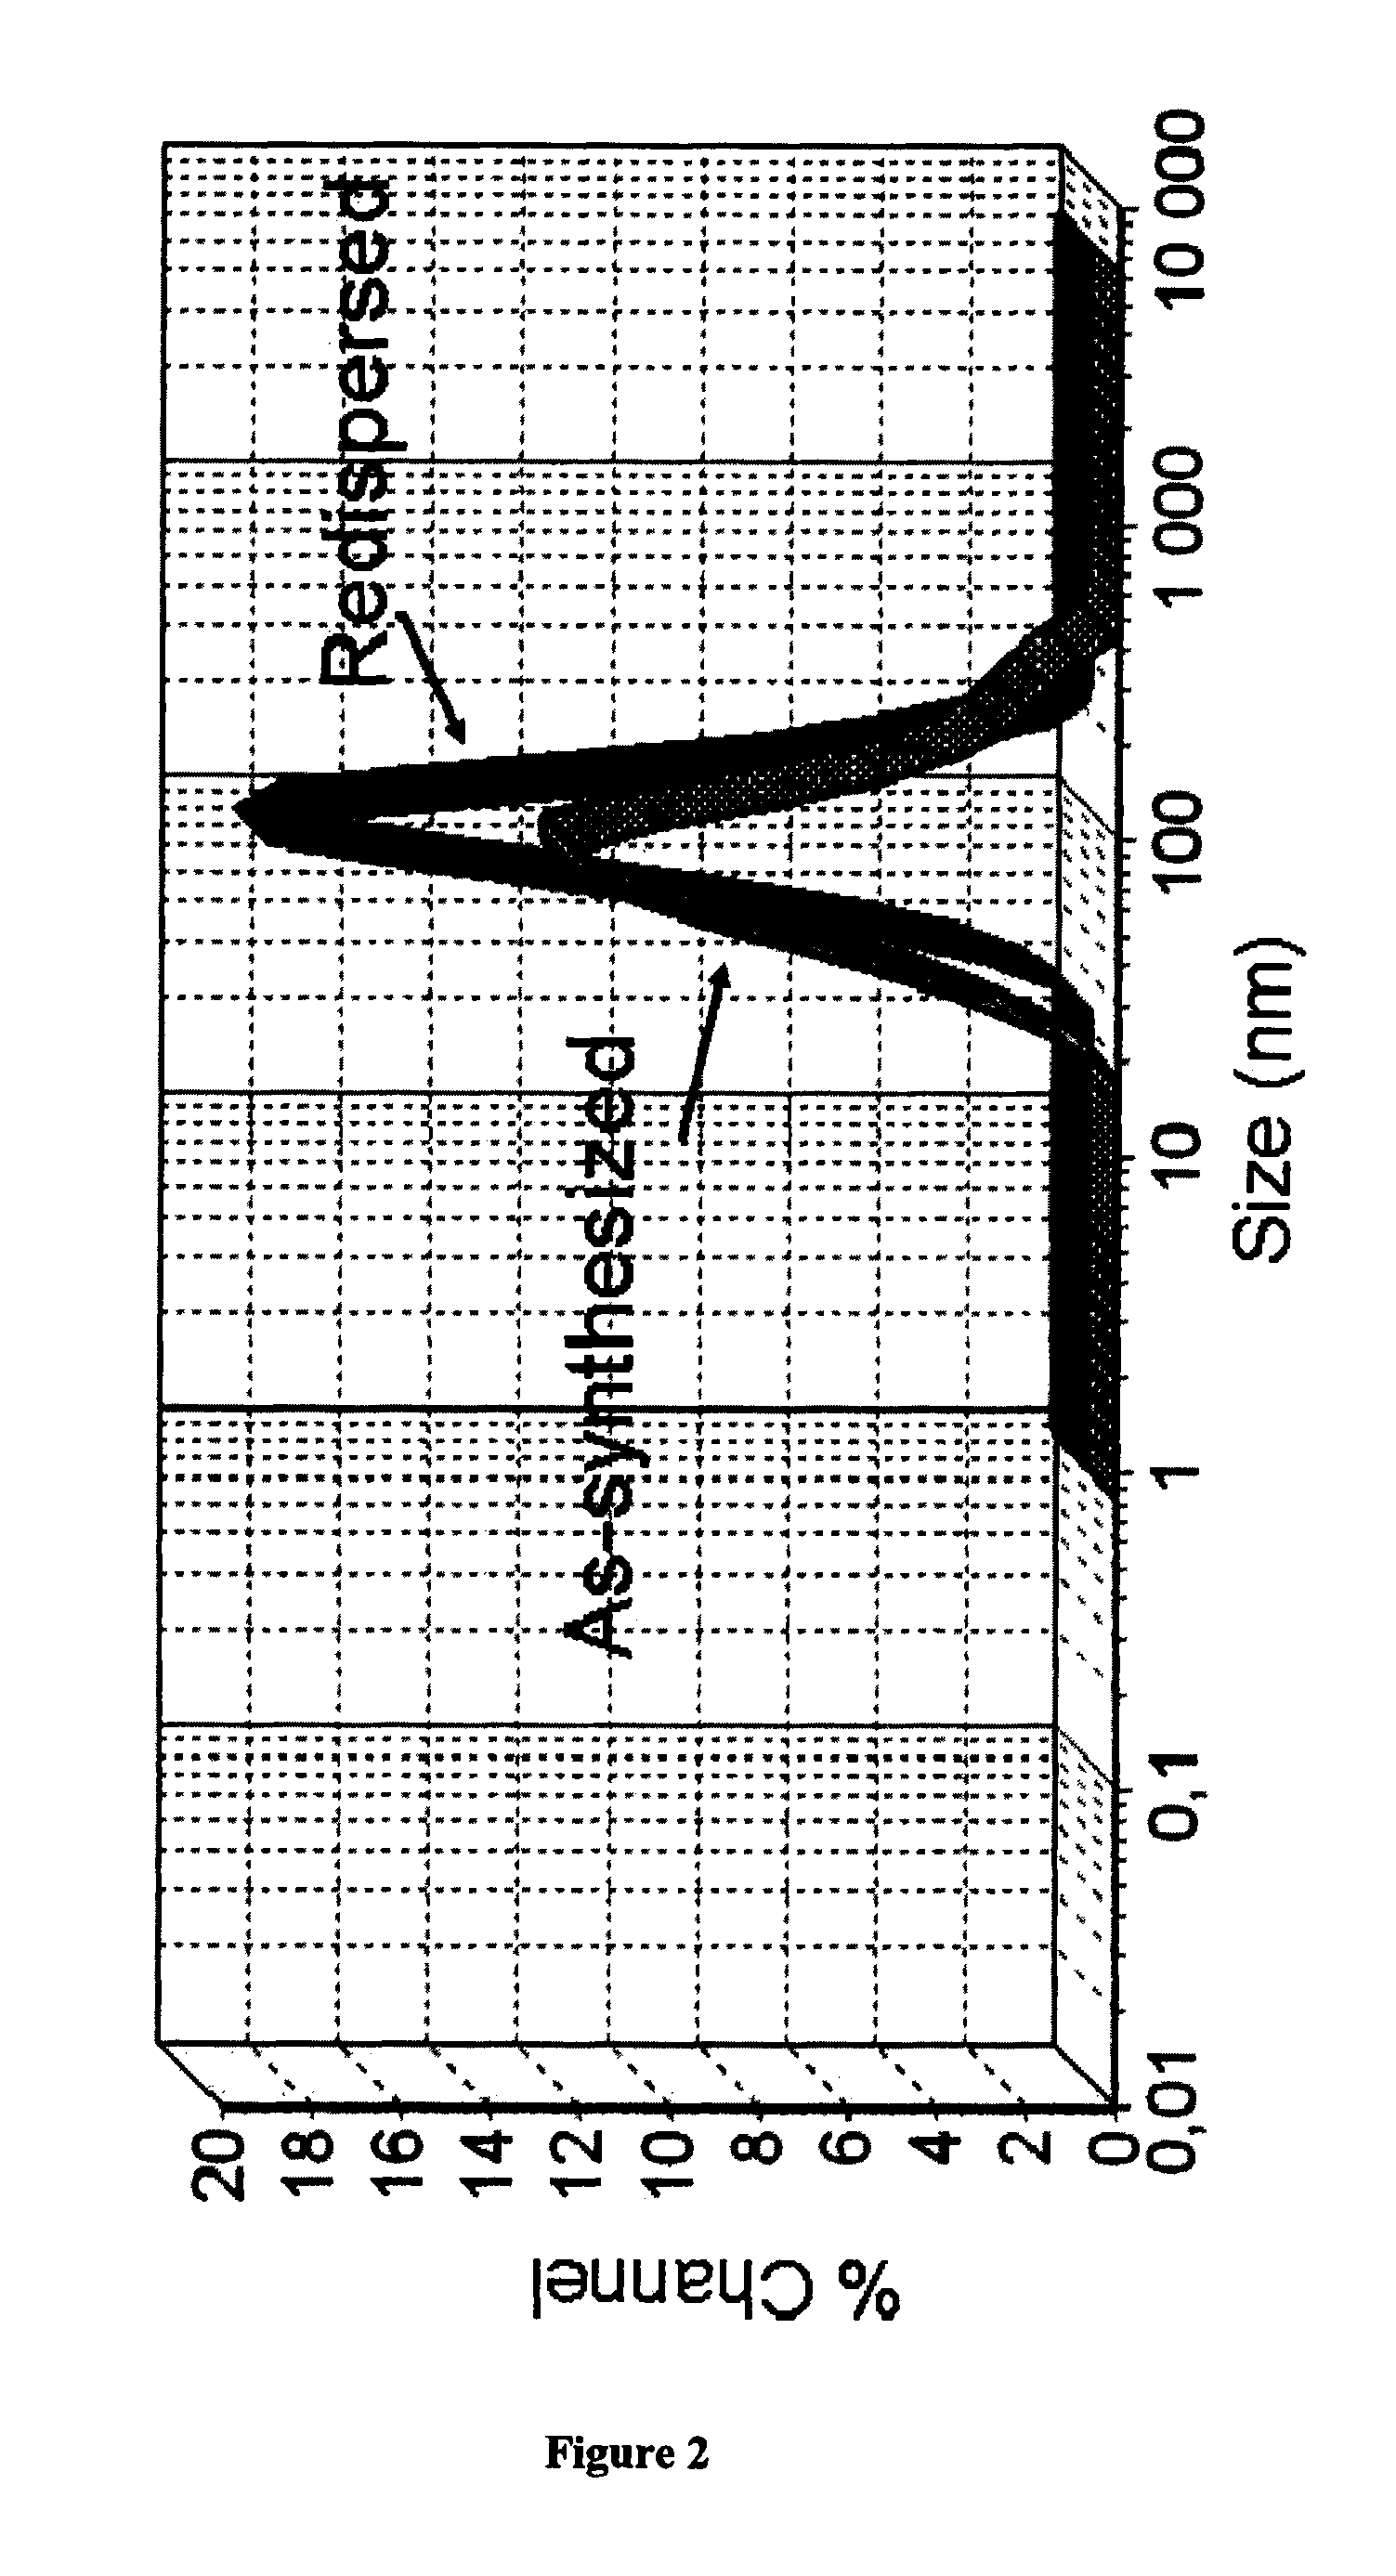 Nanostructured aprepitant compositions, process for the preparation thereof and pharmaceutical compositions containing them